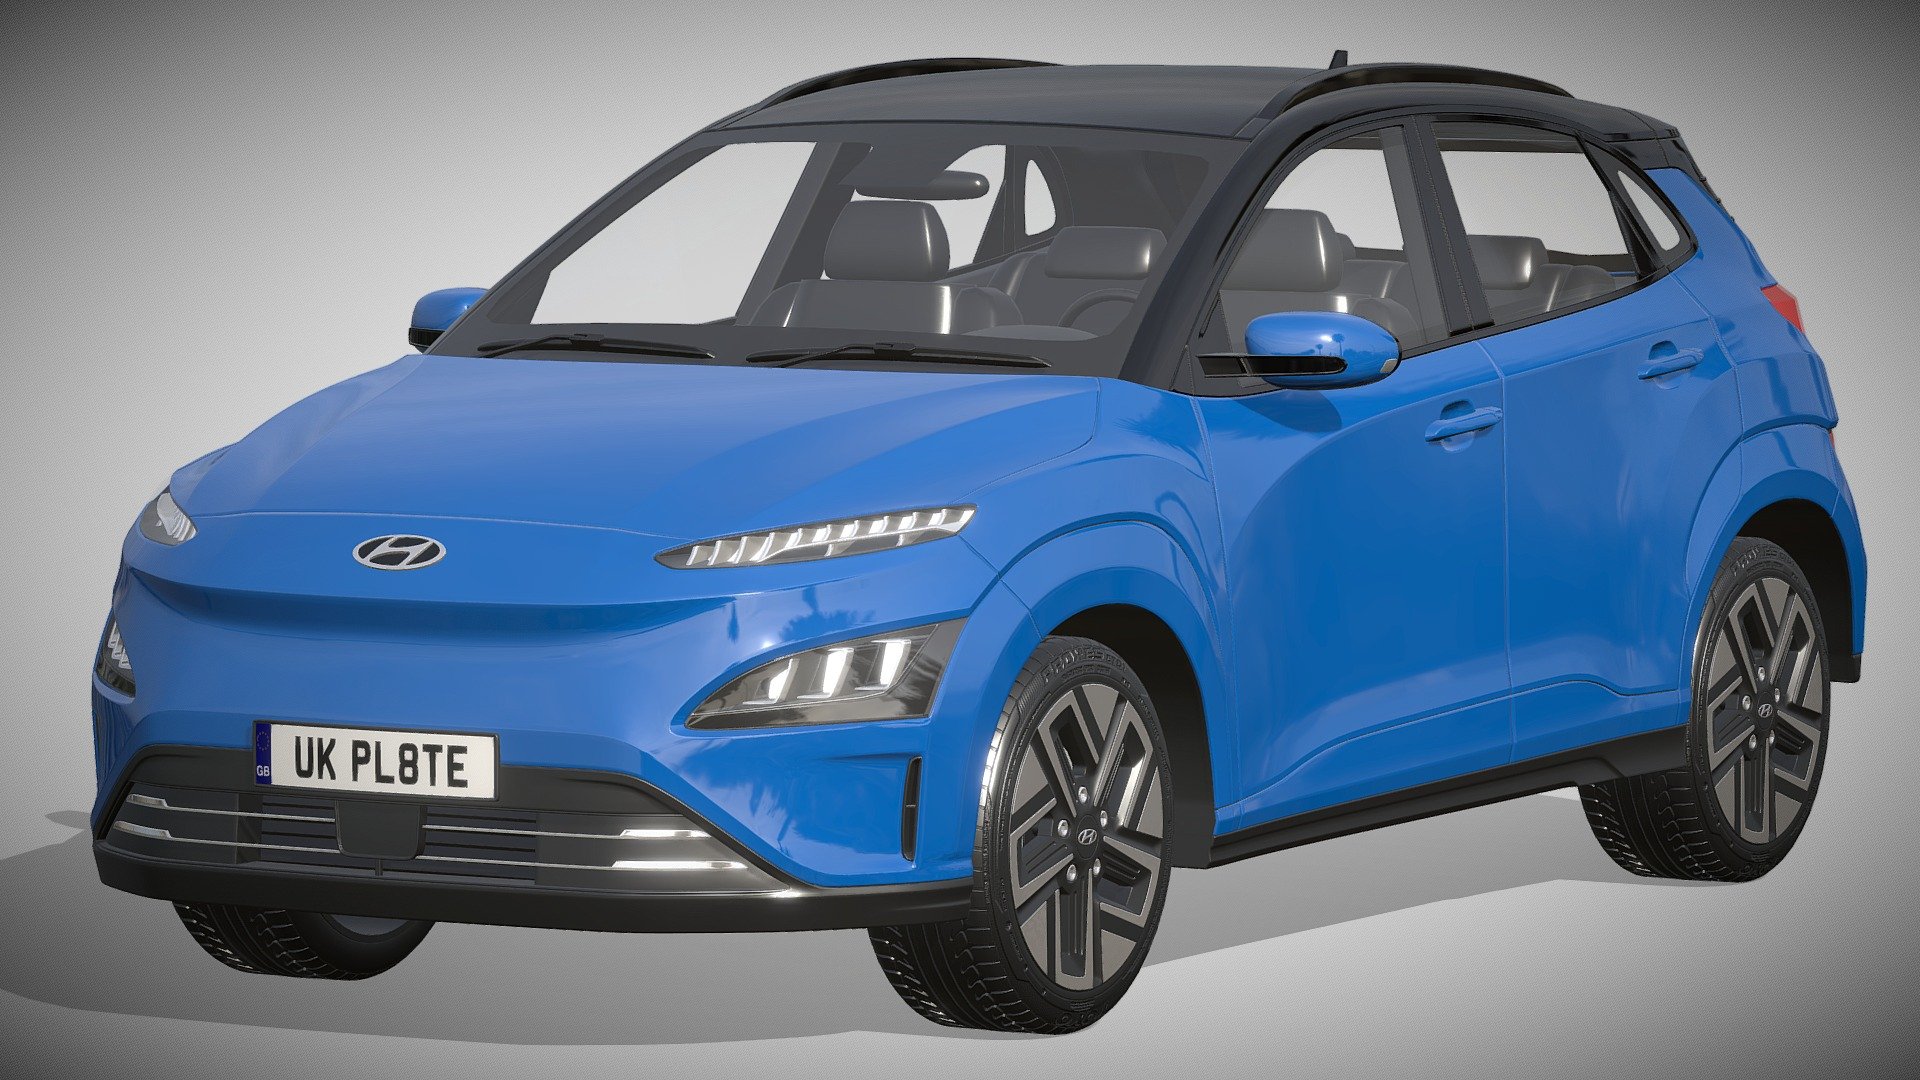 Hyundai KONA electric 2022

https://www.hyundaiusa.com/us/en/vehicles/kona-electric

Clean geometry Light weight model, yet completely detailed for HI-Res renders. Use for movies, Advertisements or games

Corona render and materials

All textures include in *.rar files

Lighting setup is not included in the file! - Hyundai KONA electric 2022 - Buy Royalty Free 3D model by zifir3d 3d model